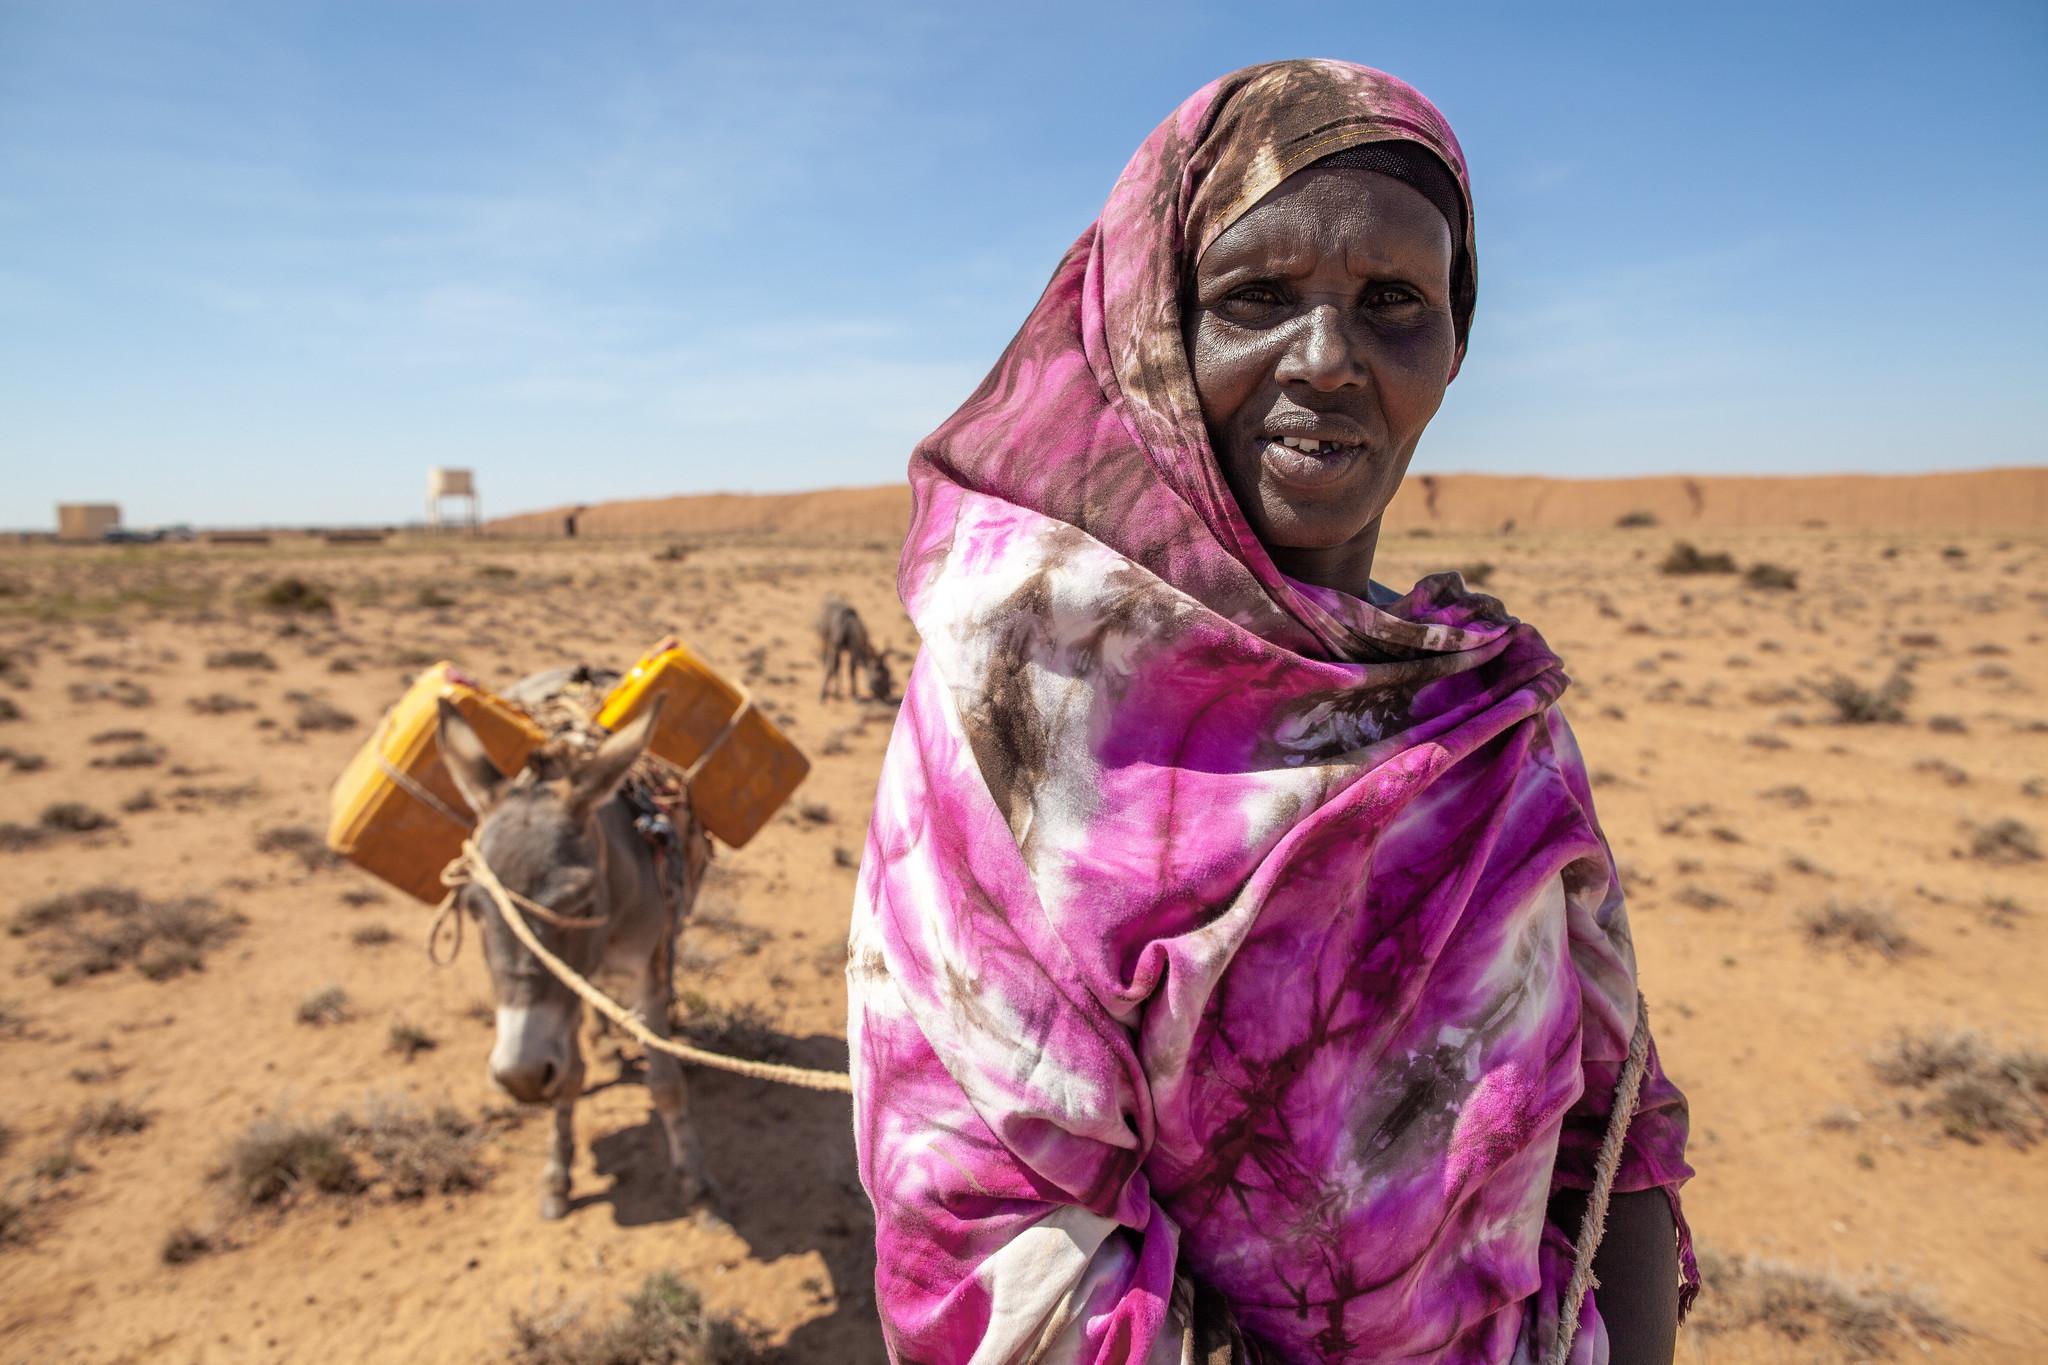 Woman getting water for her household in Somalia